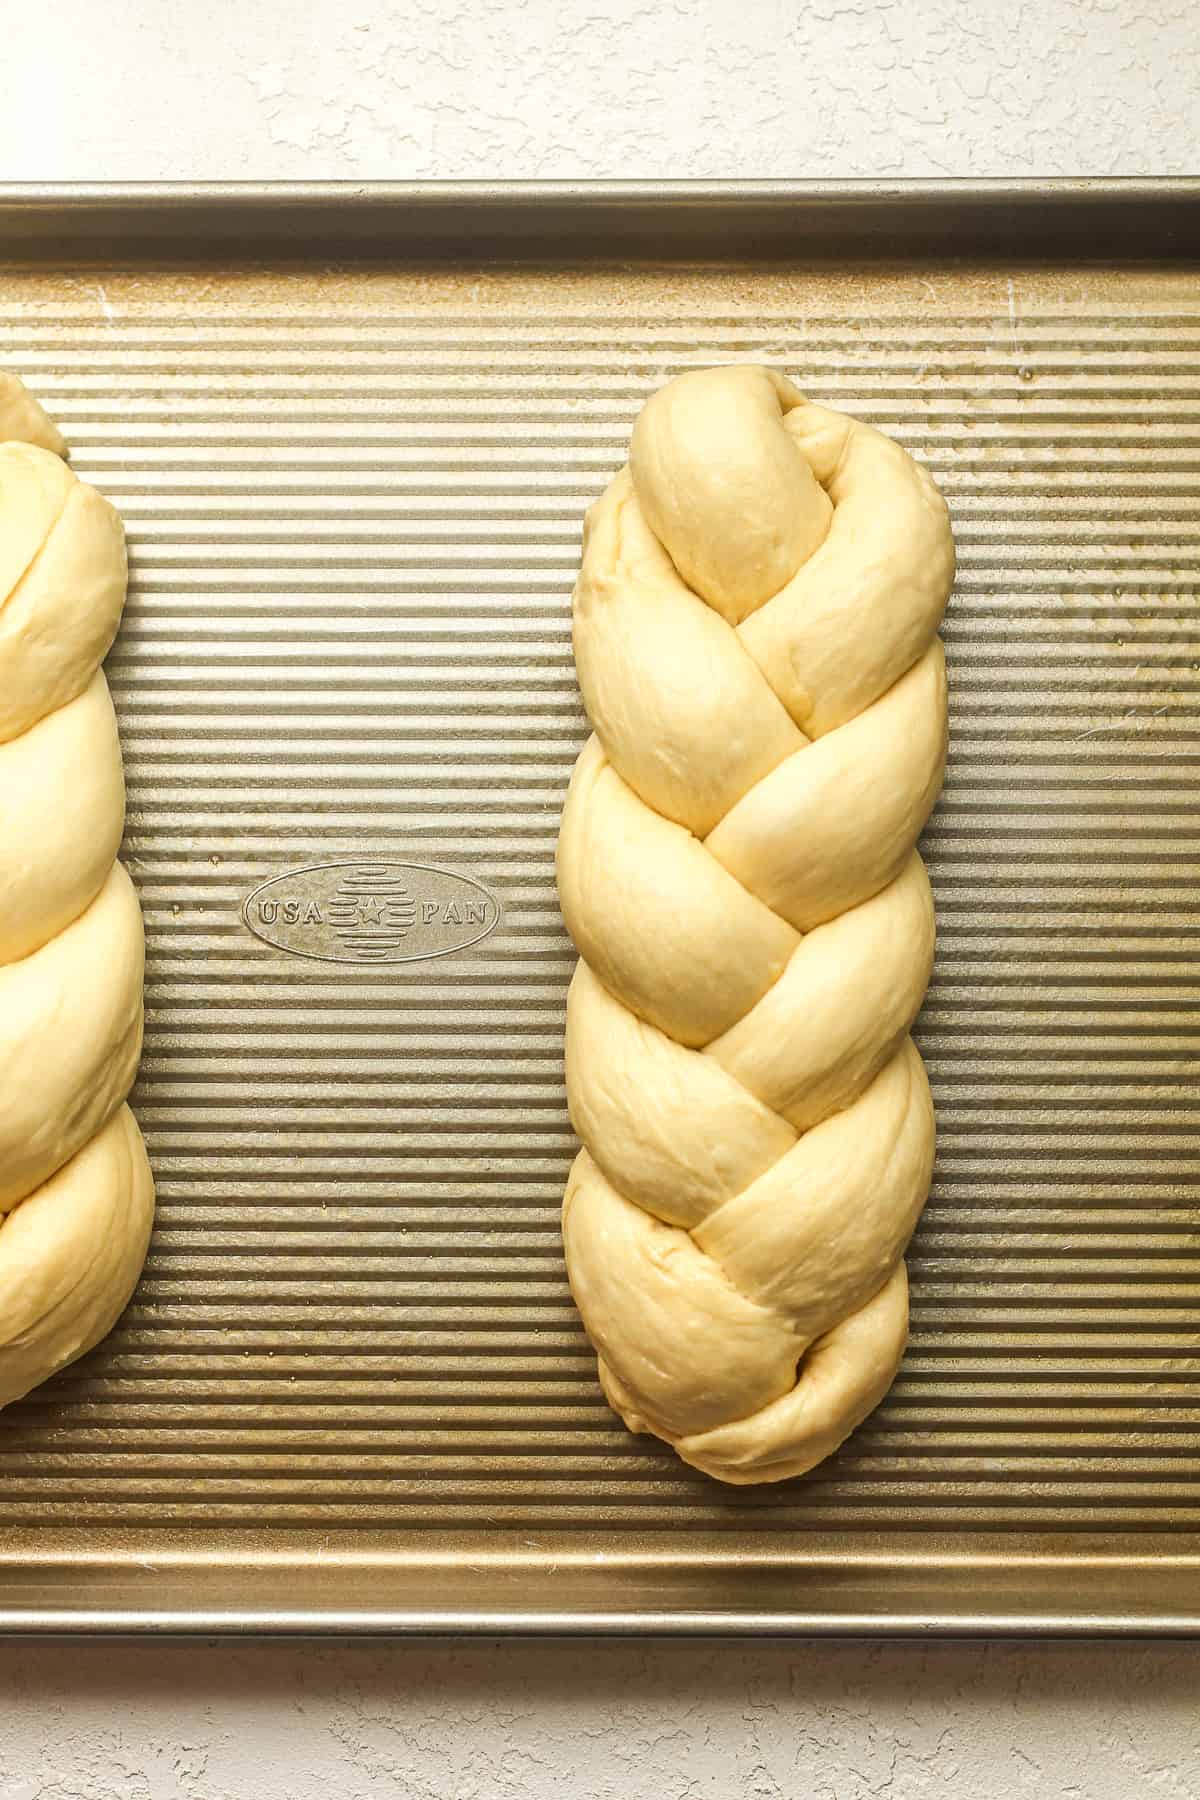 Overhead view of some braided brioche on a pan.